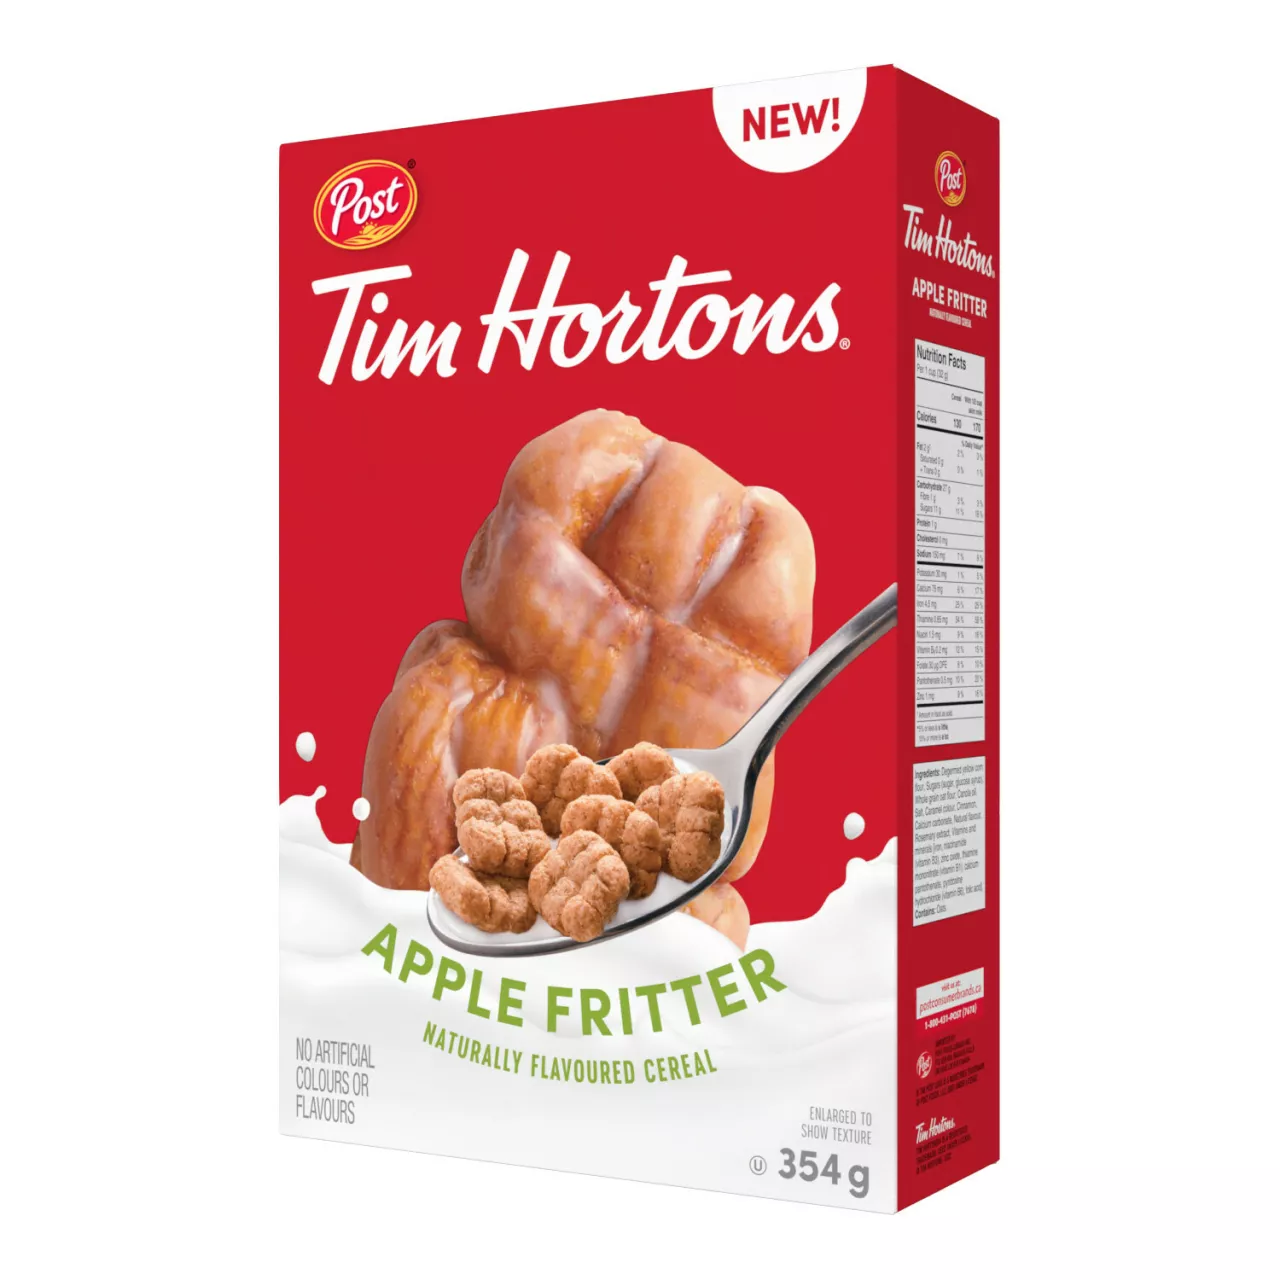 Post Tim Hortons Apple Fritter flavoured cereal is coming to a cereal bowl near you